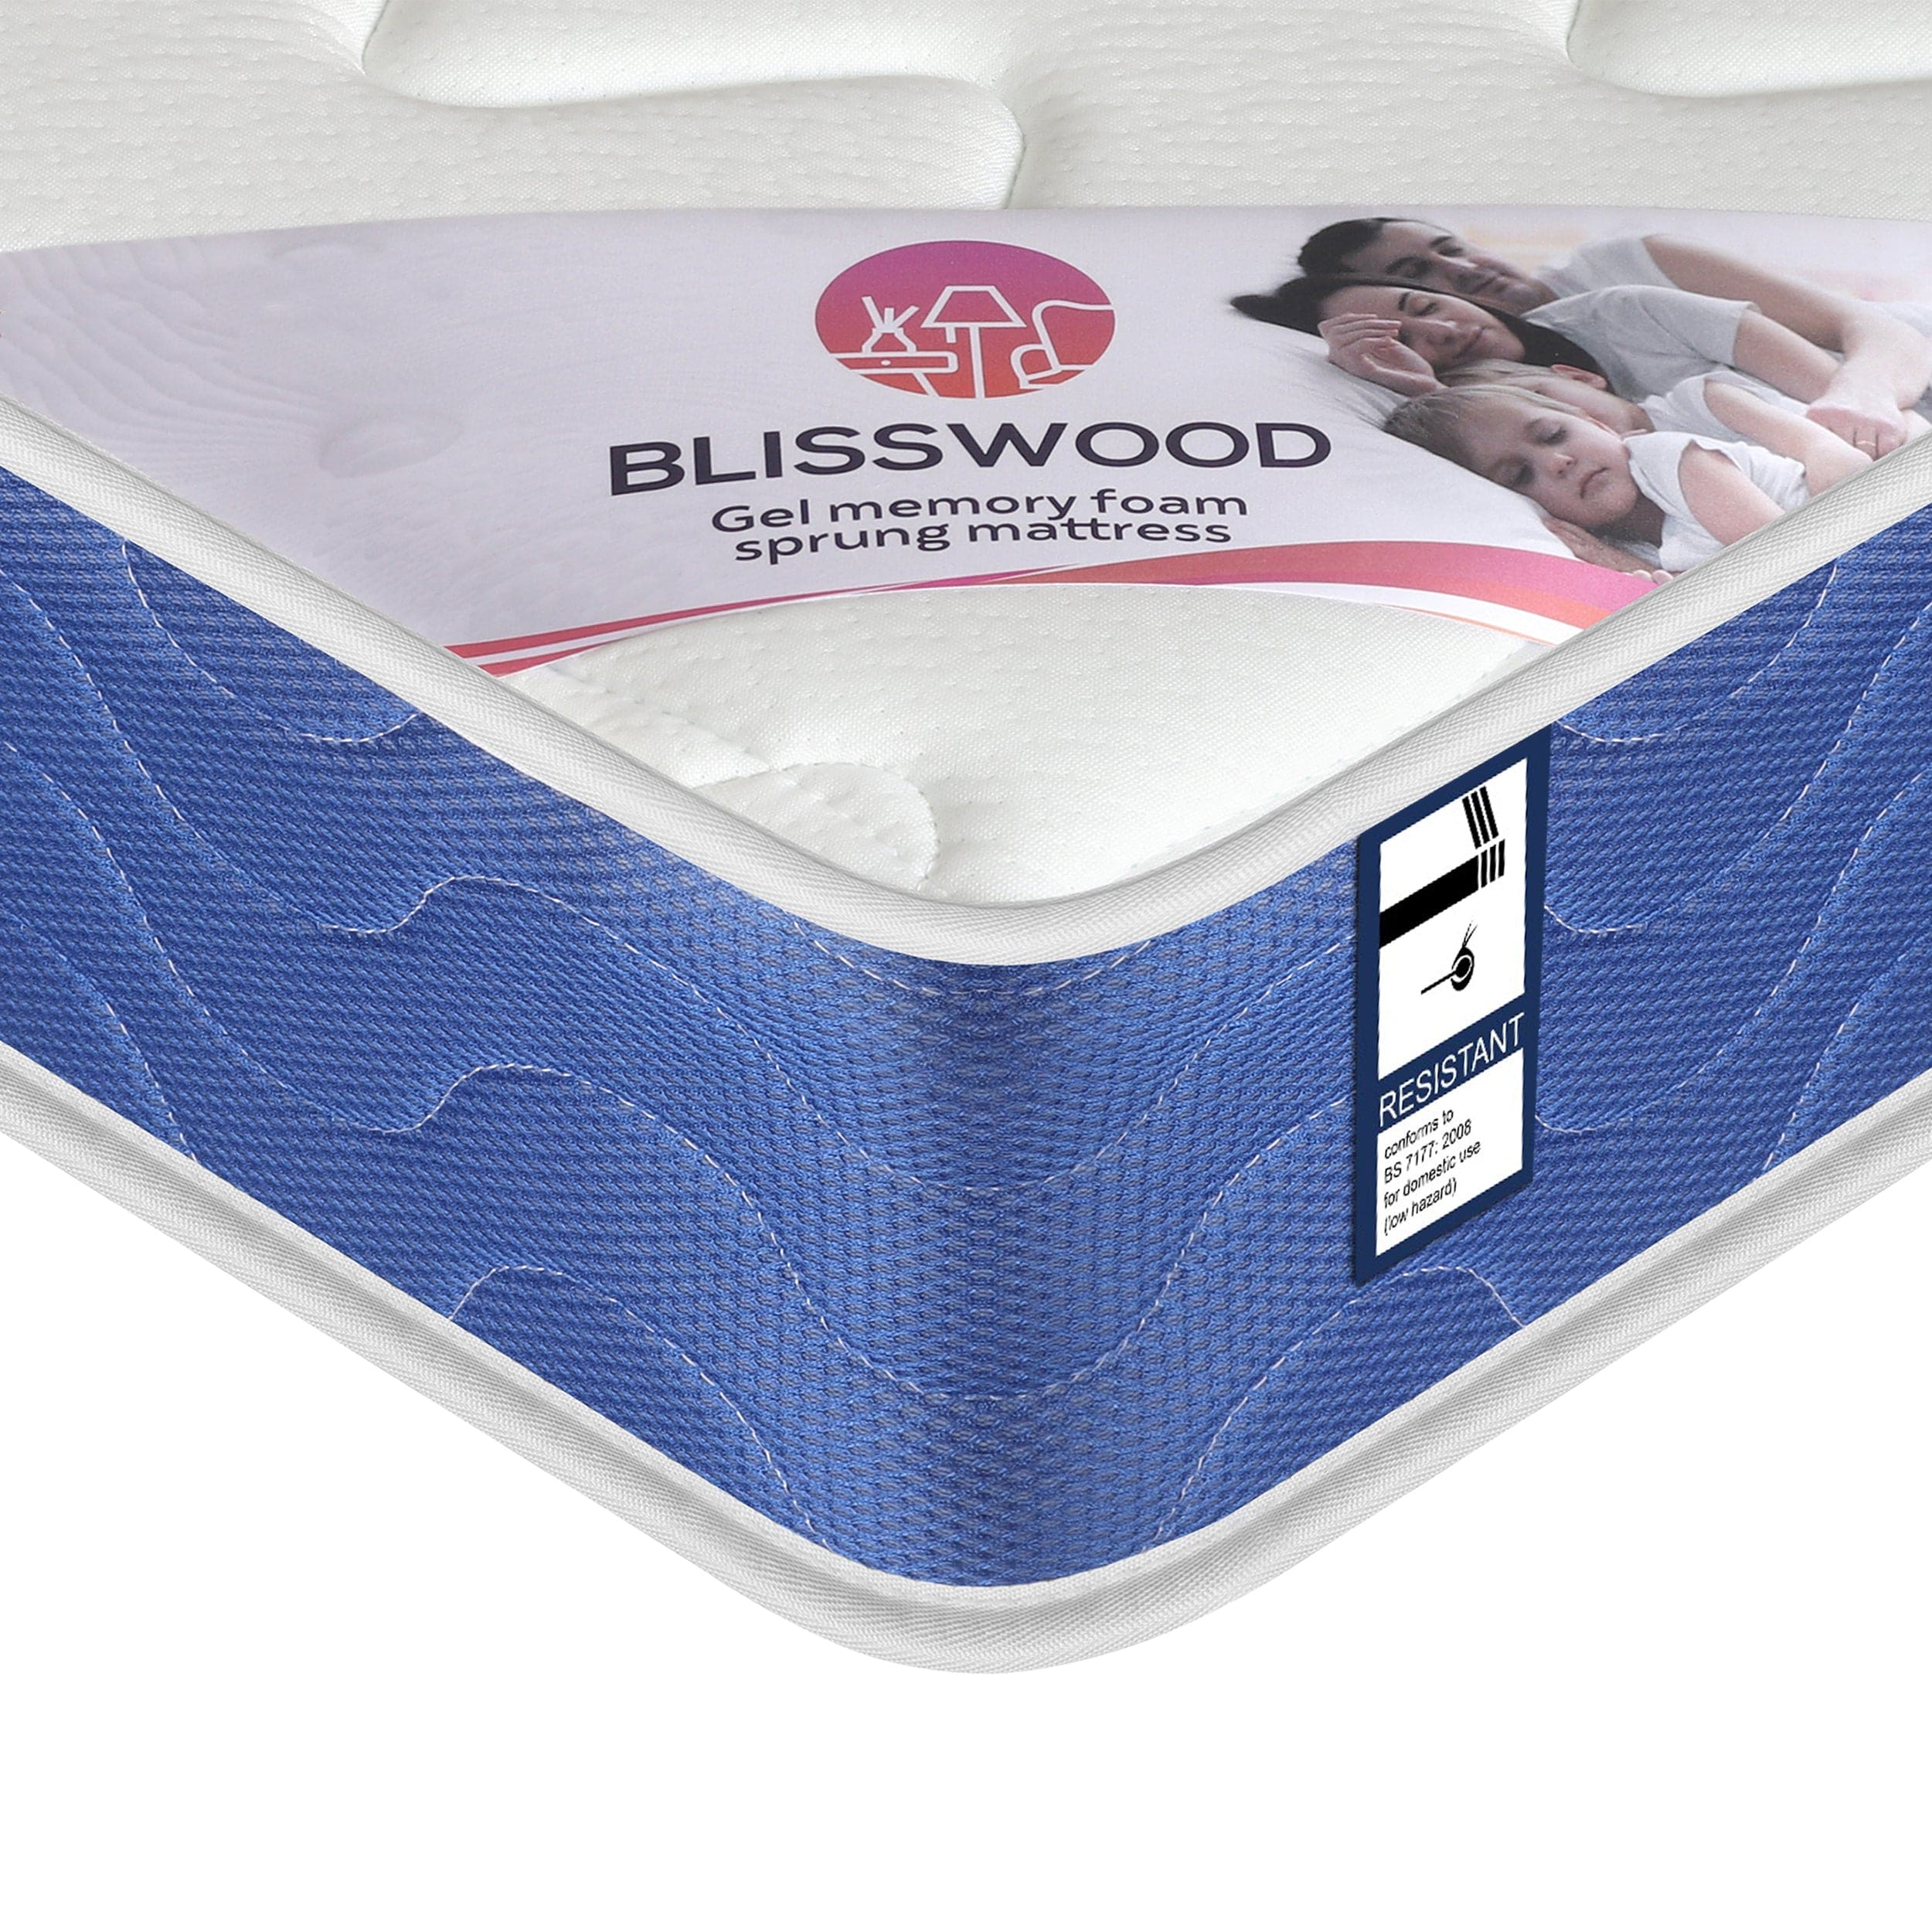 Blisswood With 8" Mattress Quilted Square Design Ottoman Storage Bed